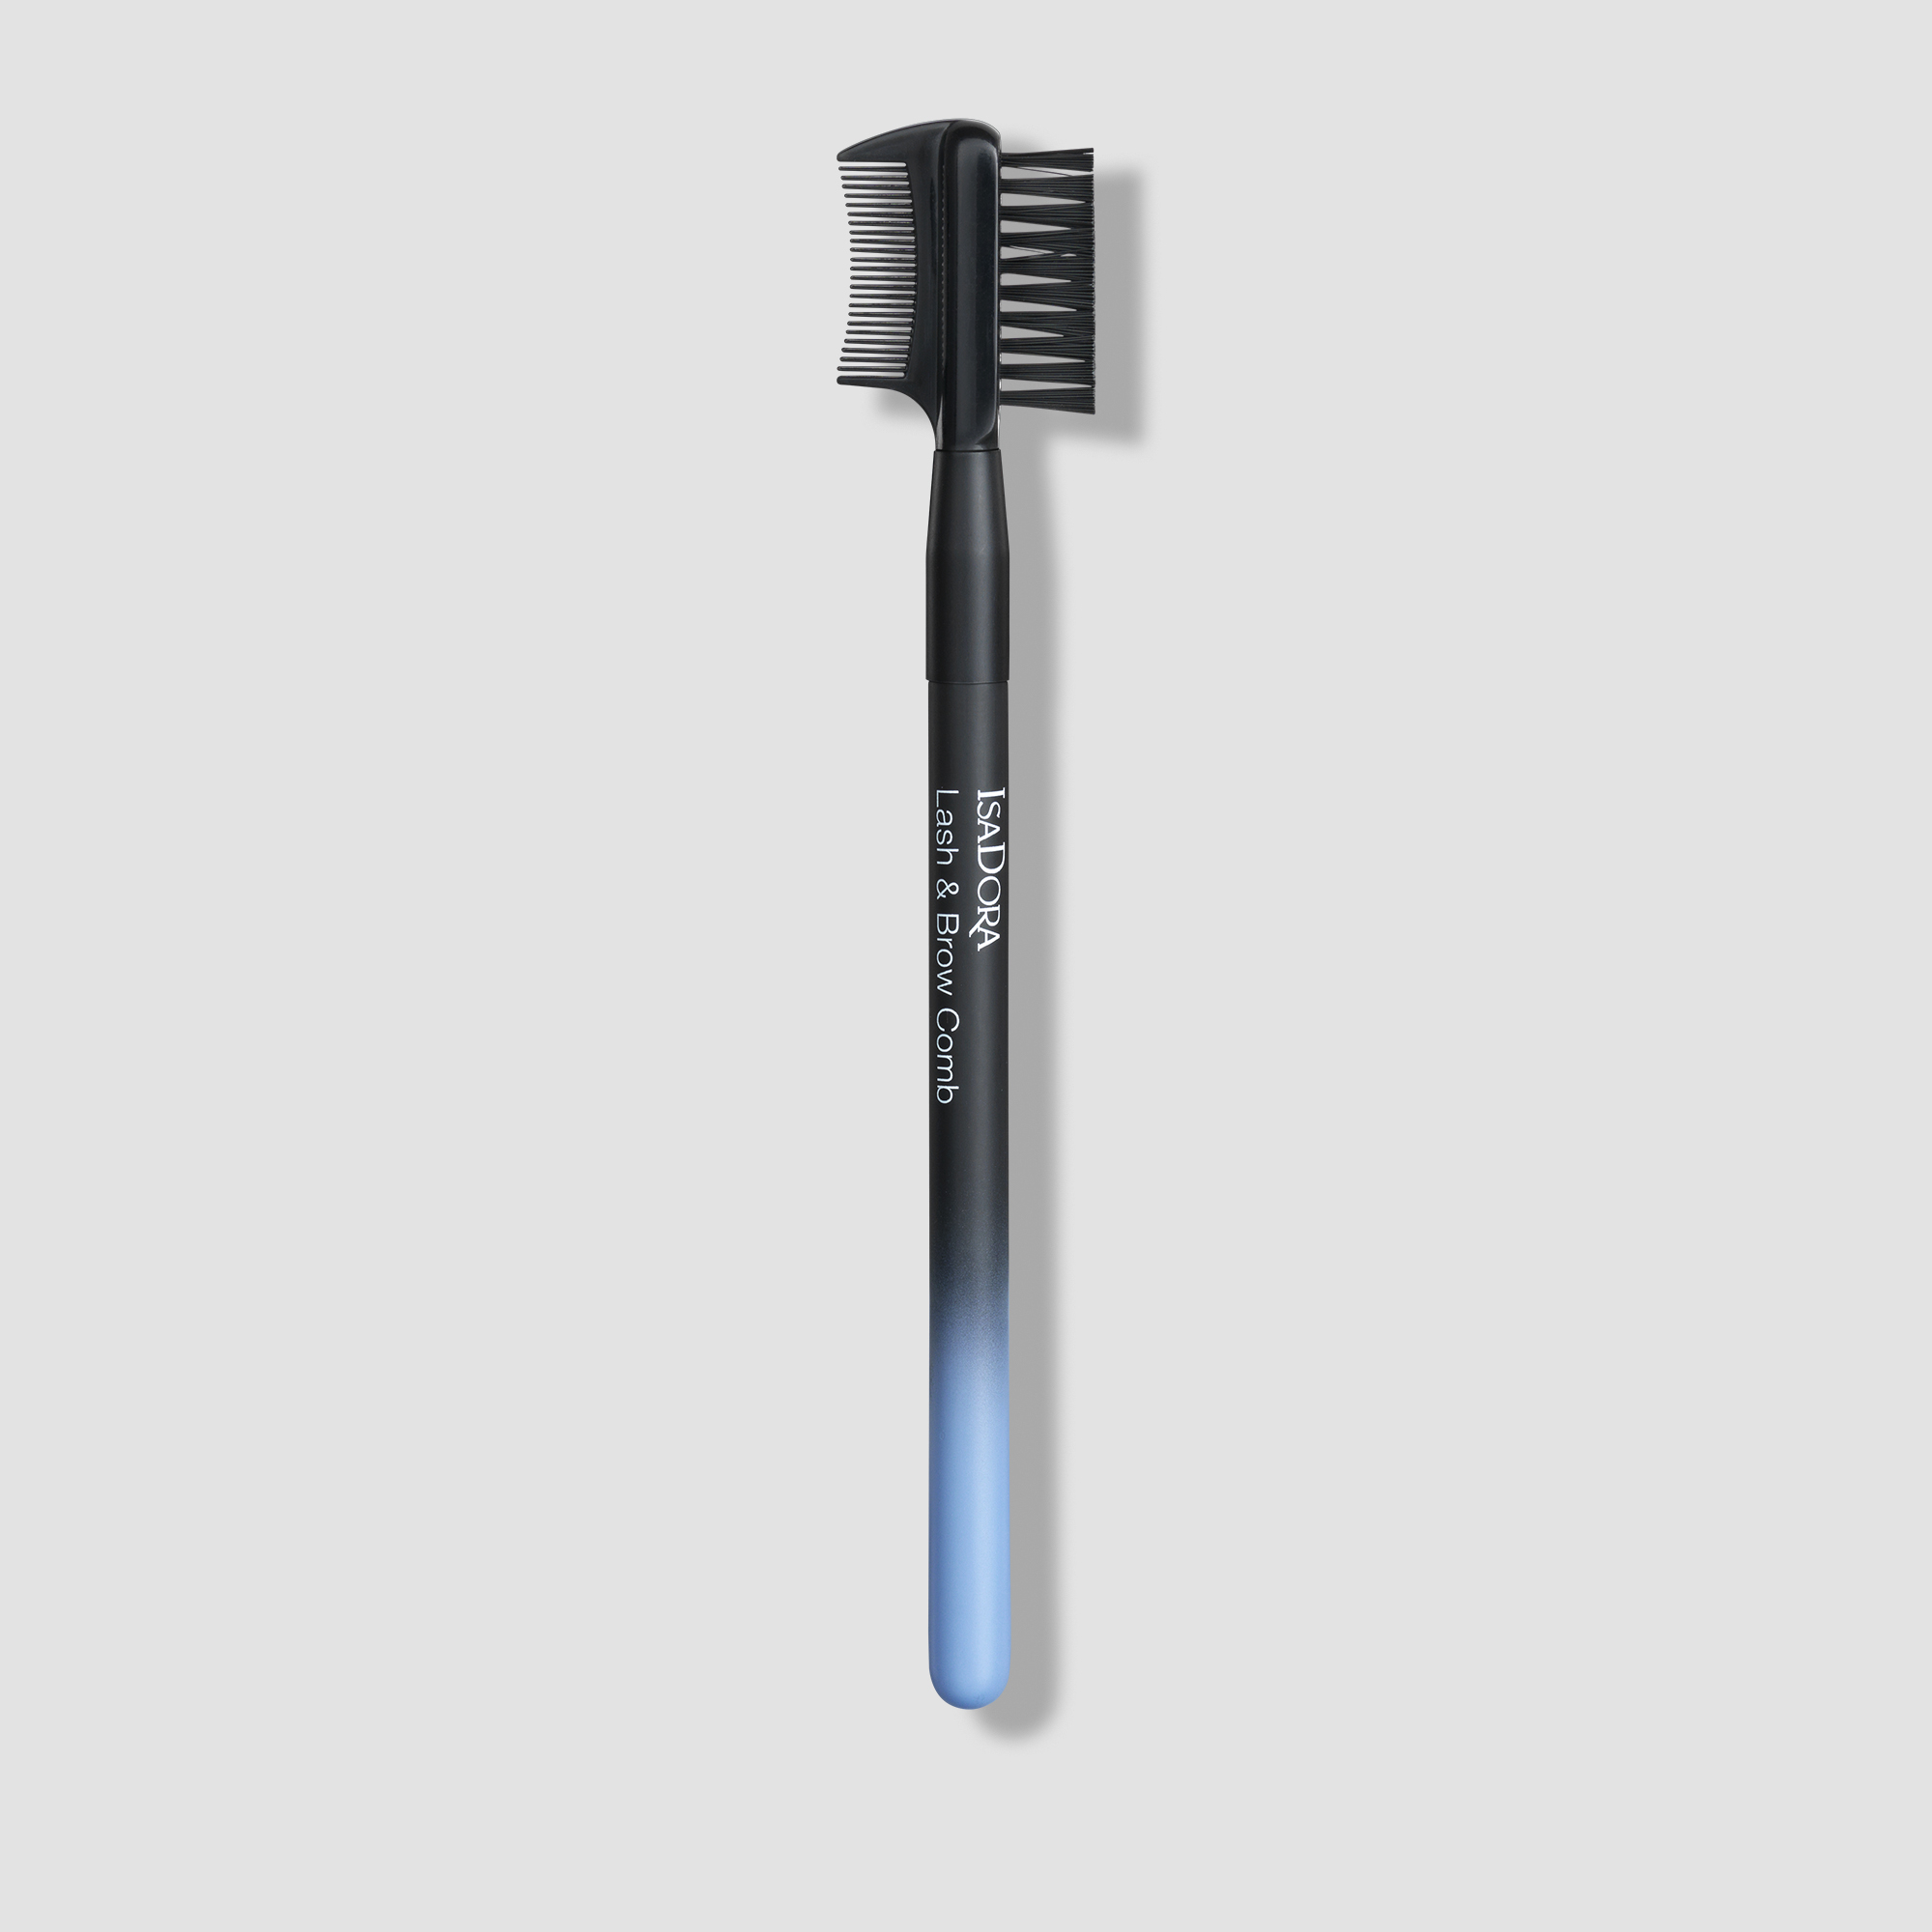 Lash And Brow Comb Lash And Brow Comb Produkter Isadora Sv